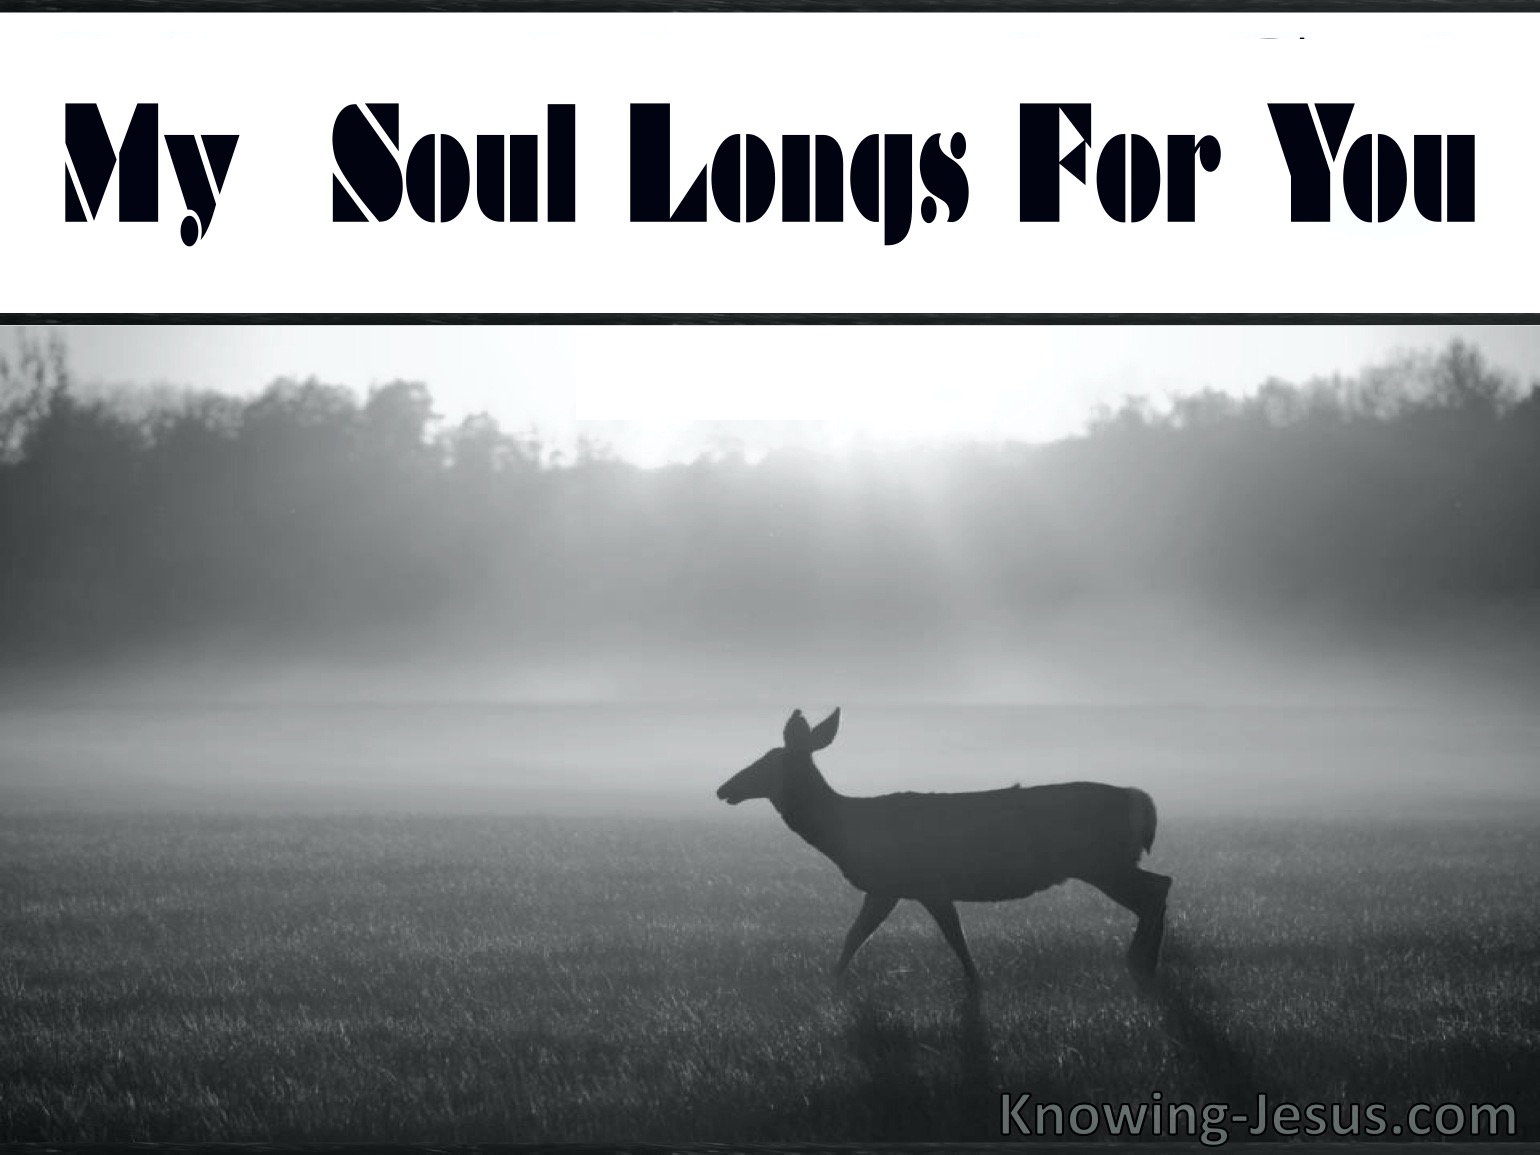 Psalm 421 As the deer pants for streams of water so my soul longs after  You O God